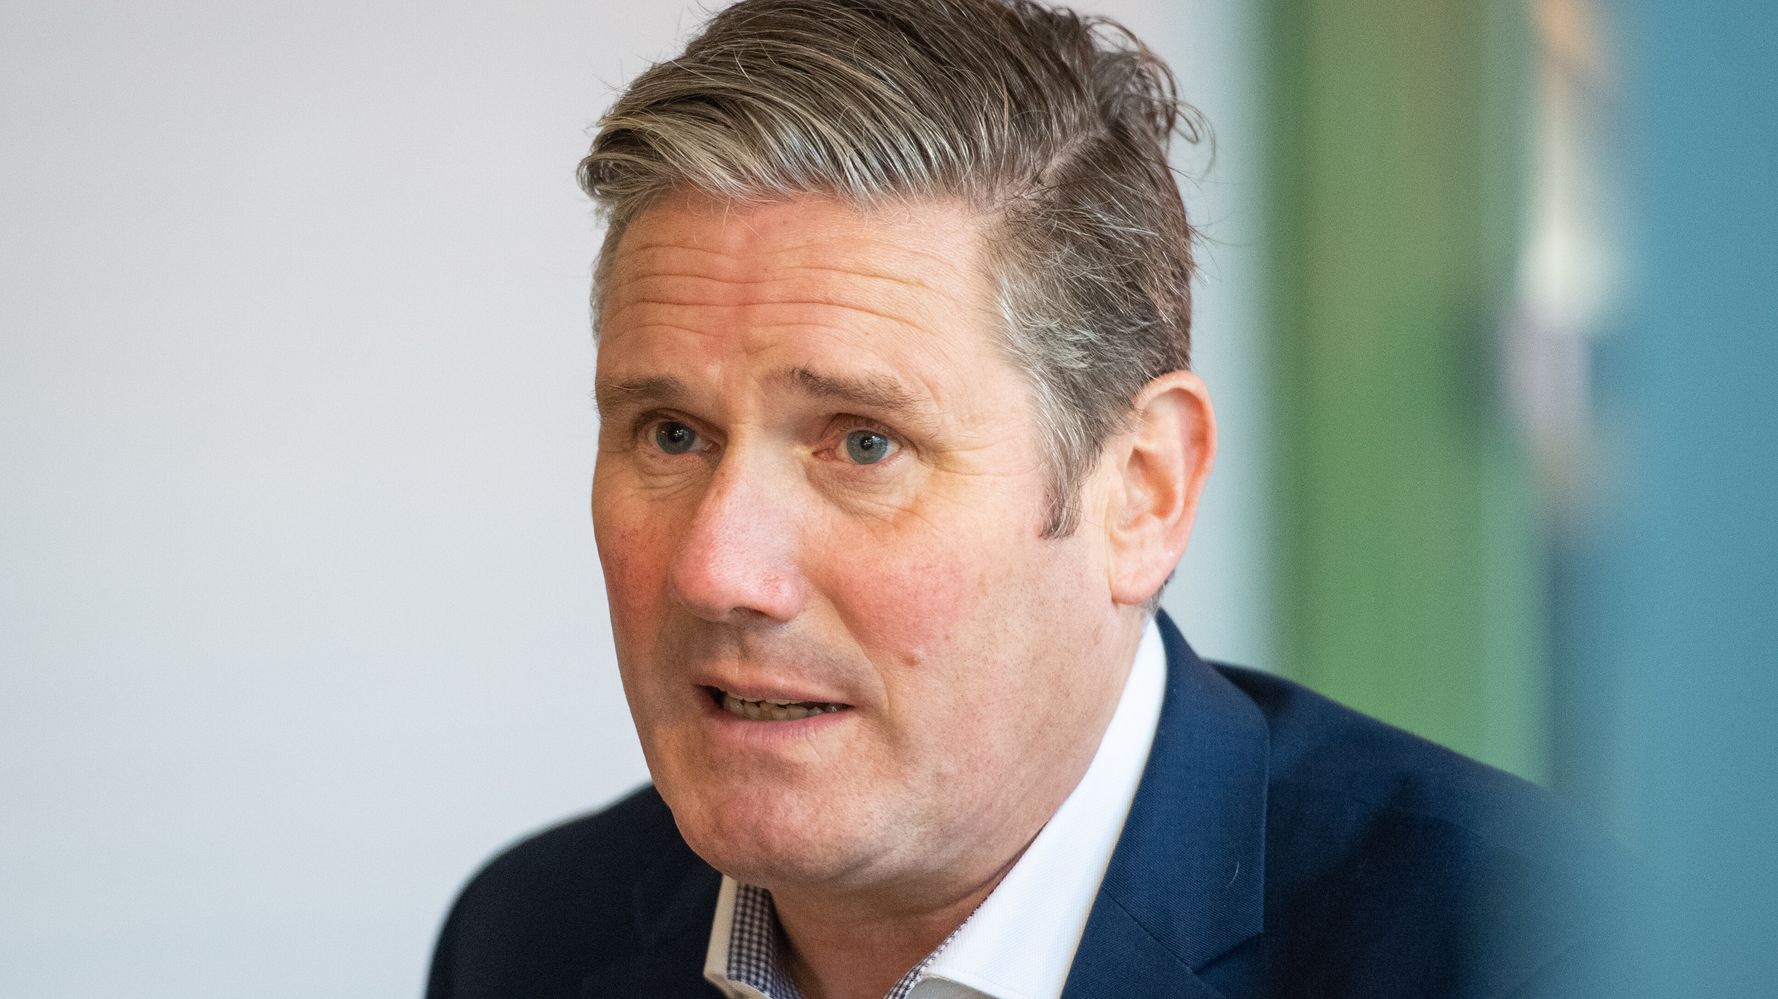 Has Keir Starmer’s ‘Strong On Security’ Stance Found Its Limits On The ...